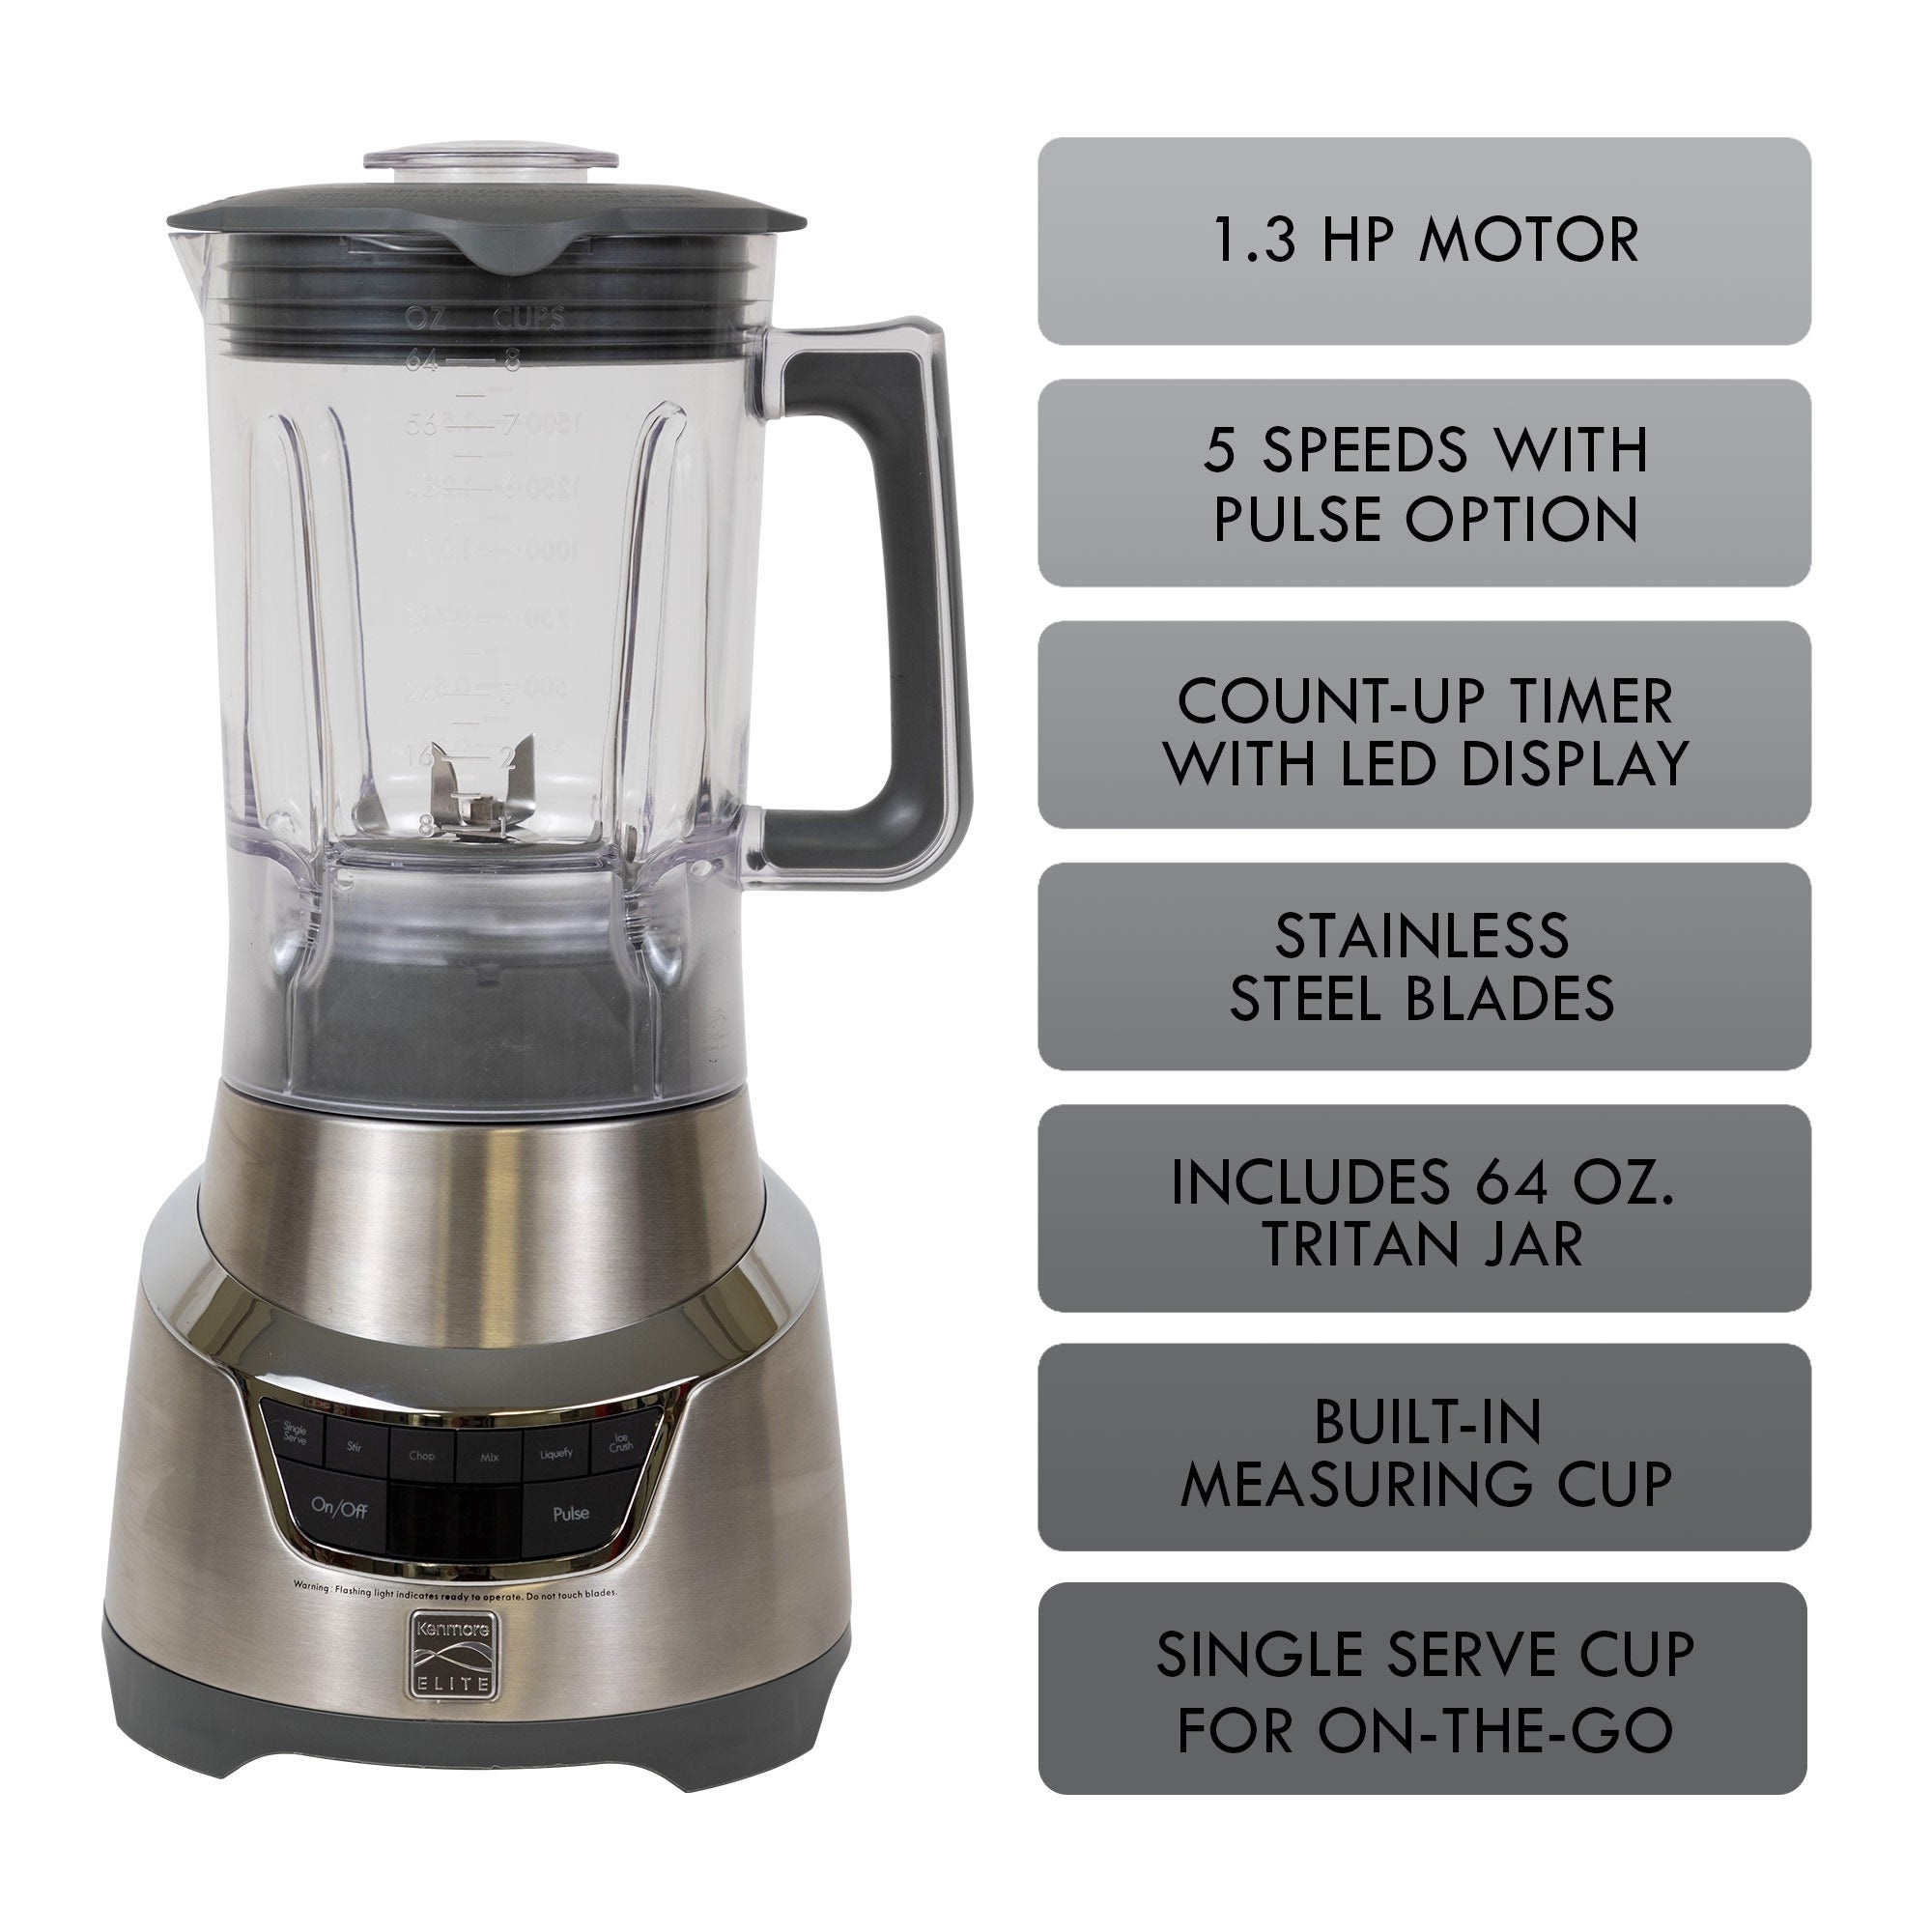 https://ak1.ostkcdn.com/images/products/is/images/direct/db98d66a4cb8c6eafb9a420d121c14731a5e4d33/Kenmore-Elite-5-Speed-Countertop-Blender-Plus-Travel-Cup.jpg